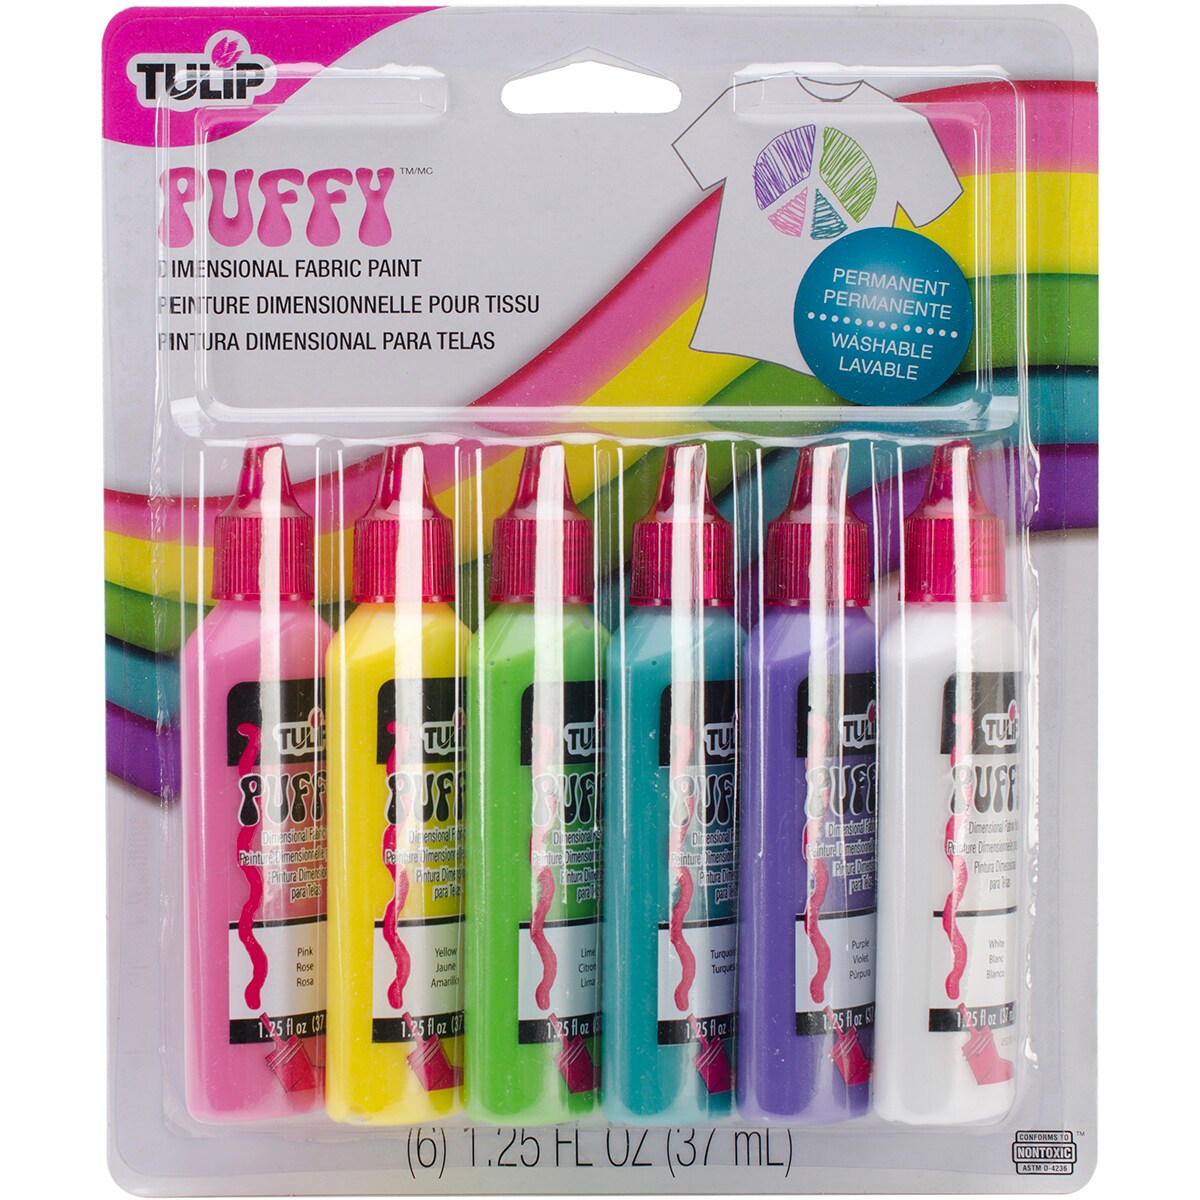 Tulip Dimensional Fabric Paint Puffy 1.25 fl. oz. 6 Pack – Tulip Color  Crafts